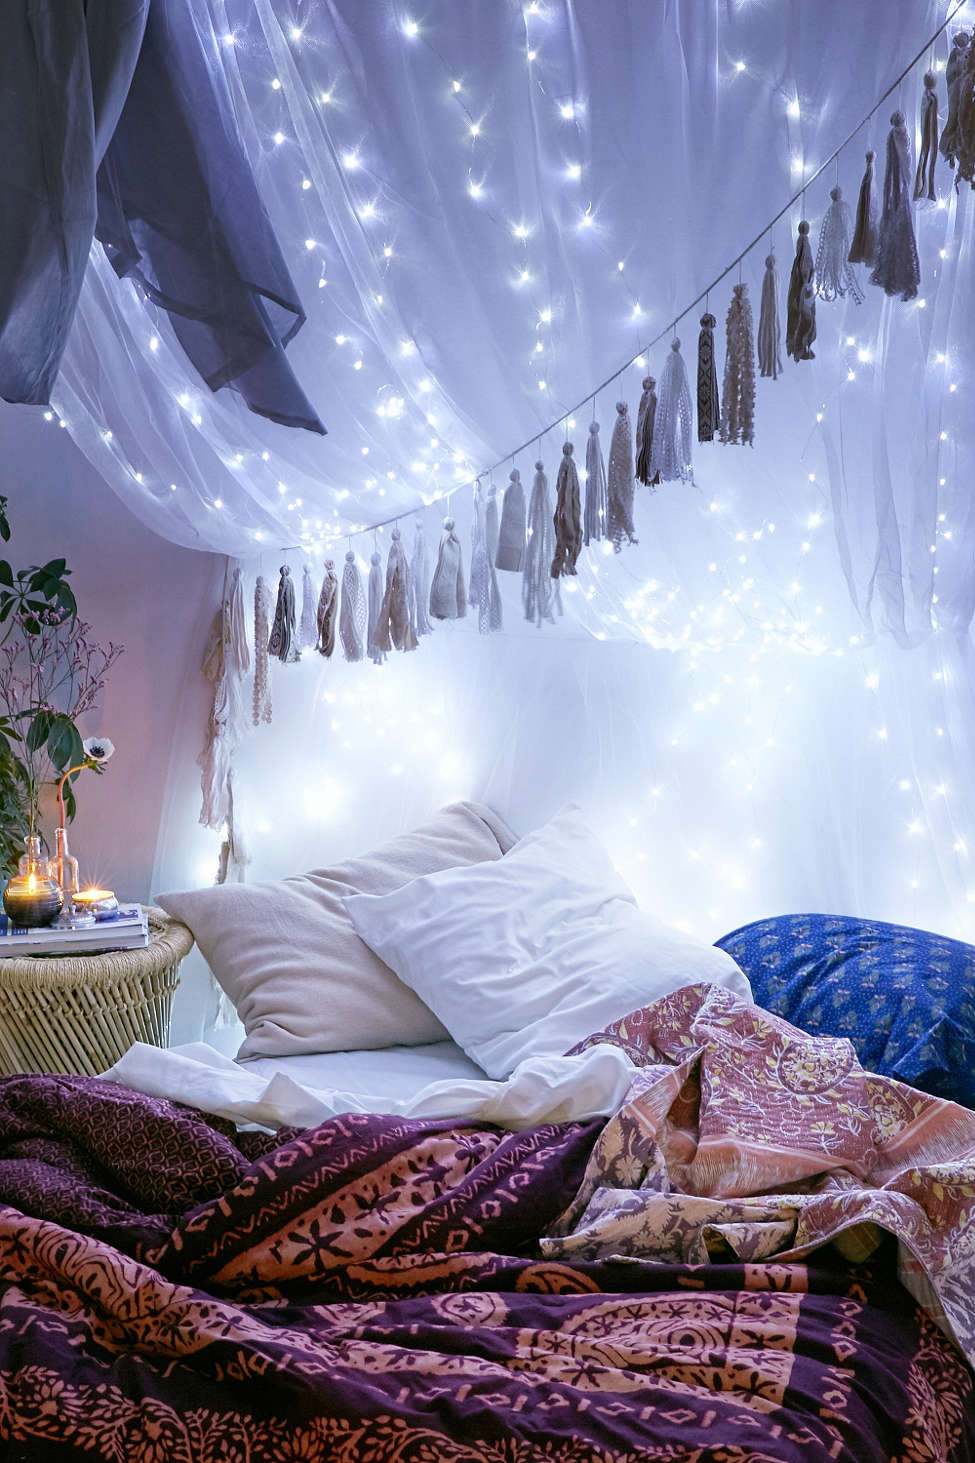 fairytale-lights-into-the-bedroom-dip-feed-4